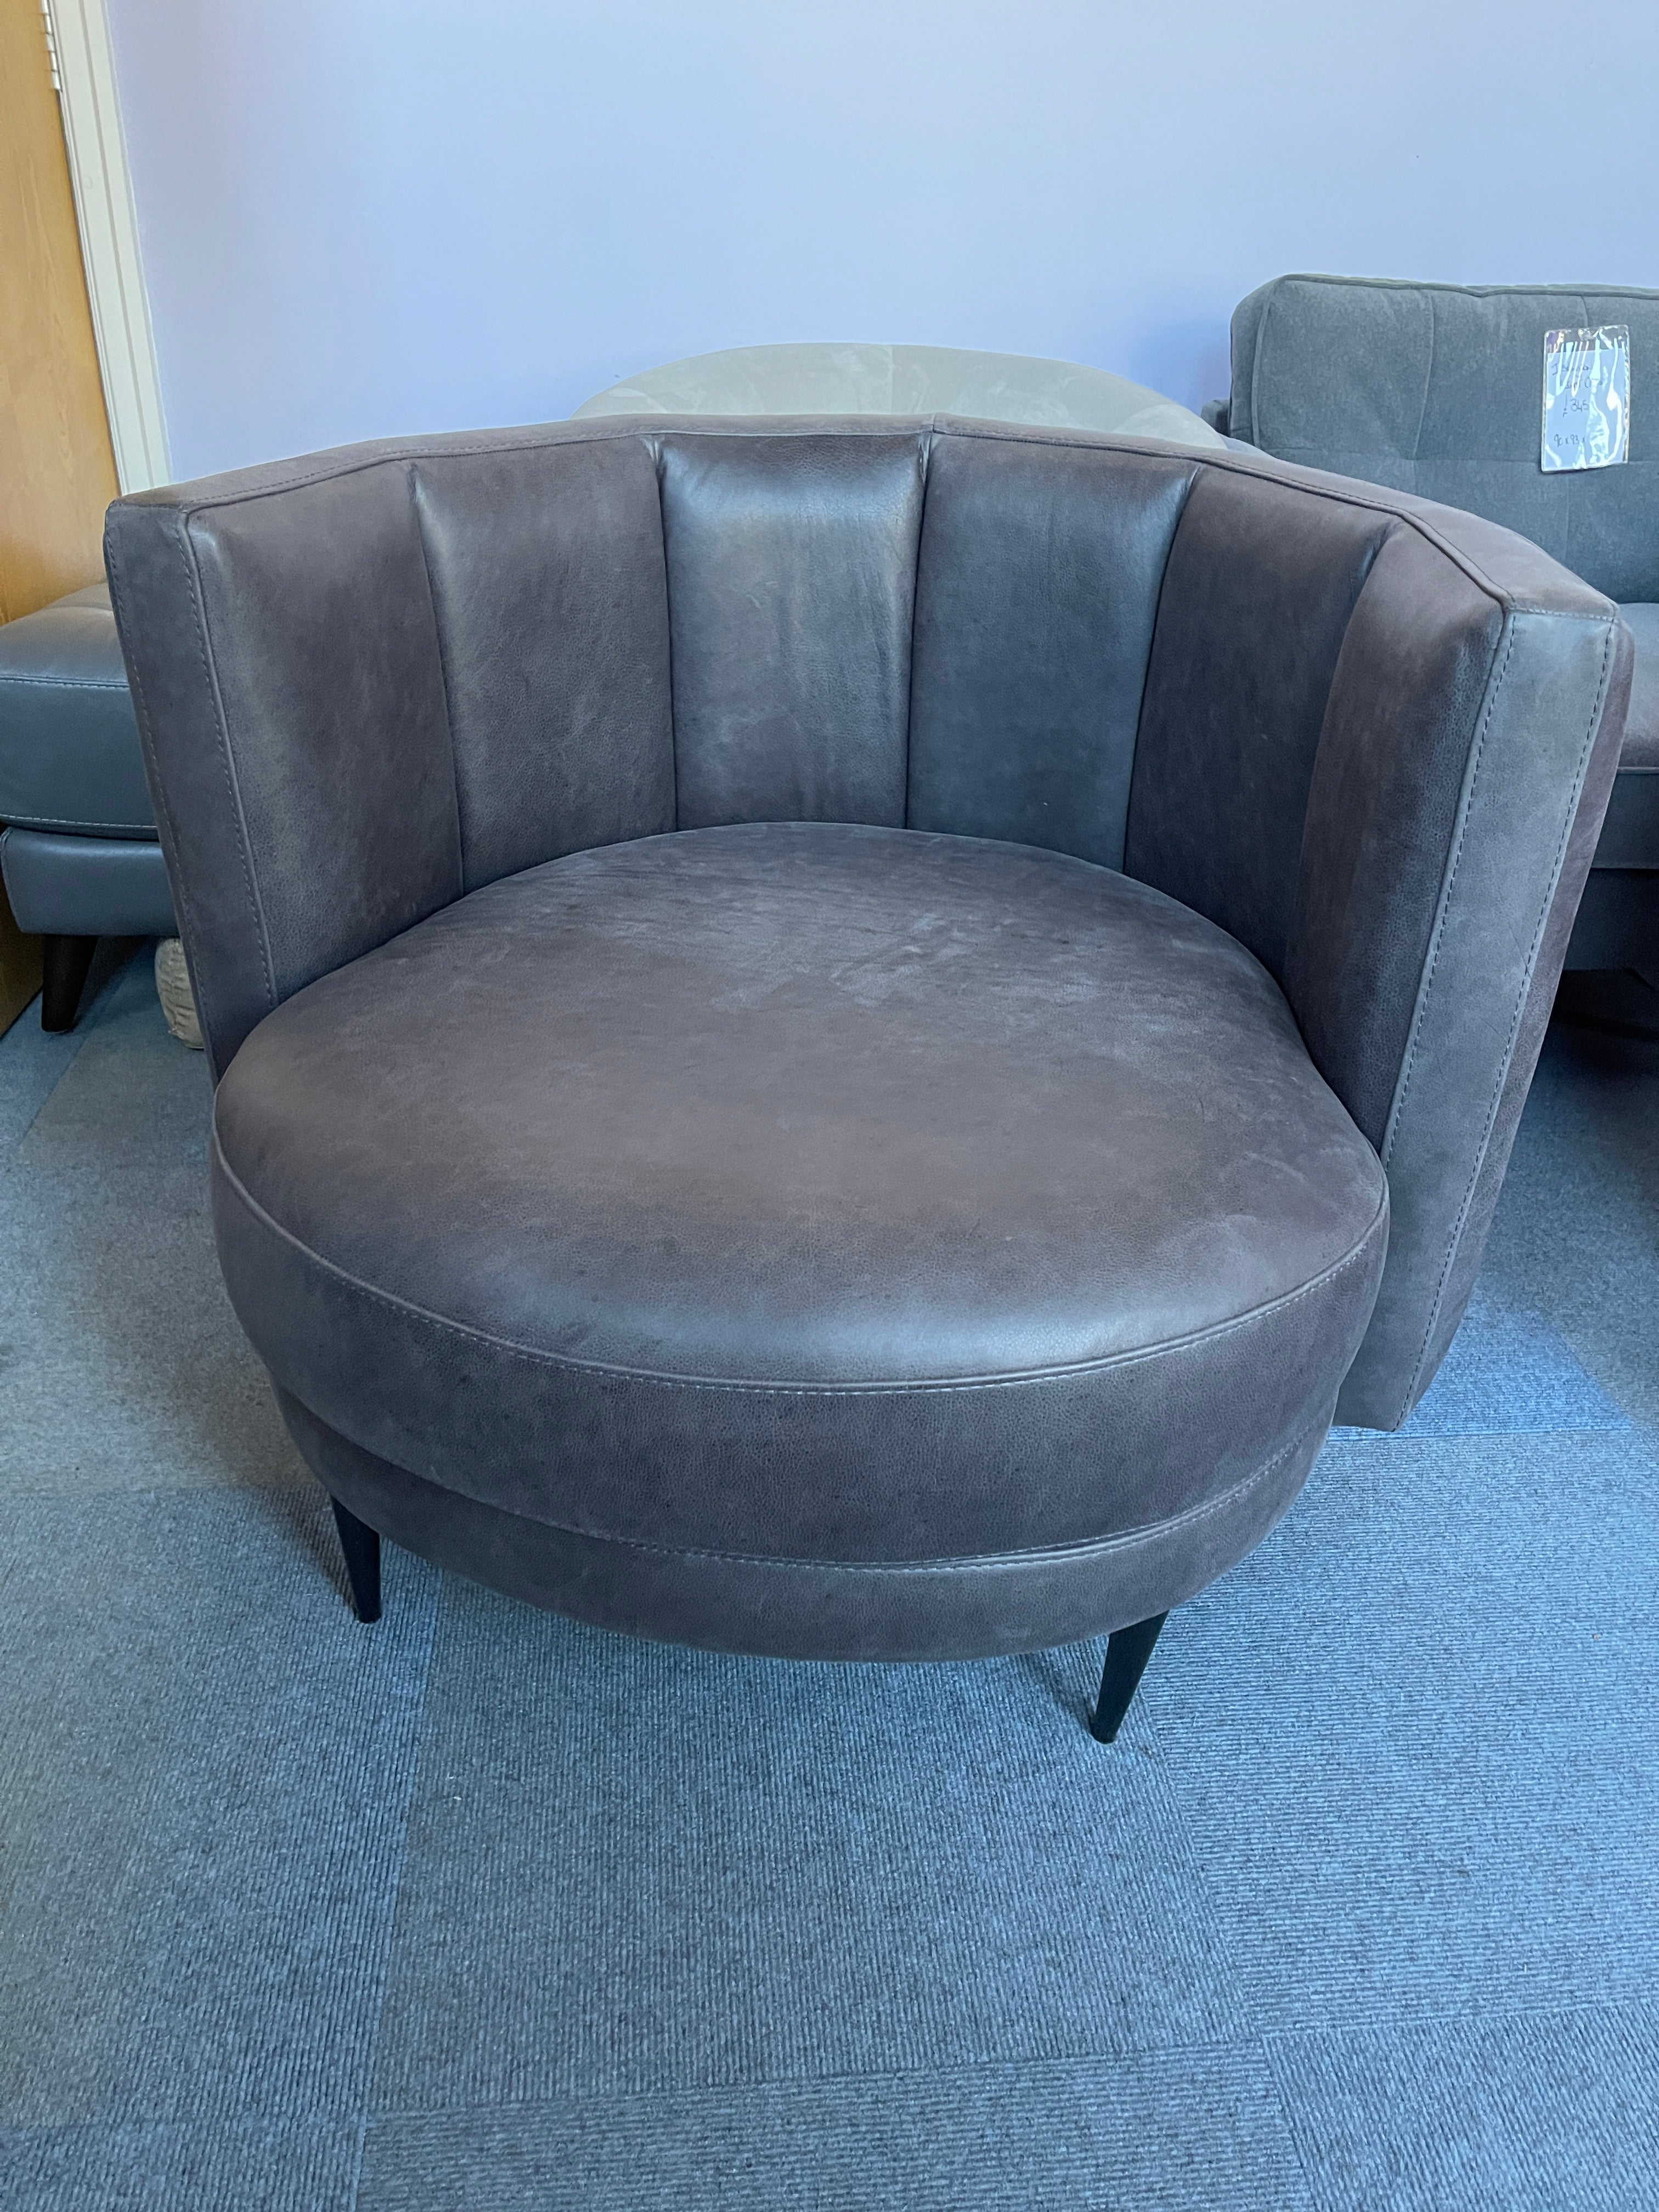 SOFOLOGY LINARA retro round tub chair in charcoal grey leather